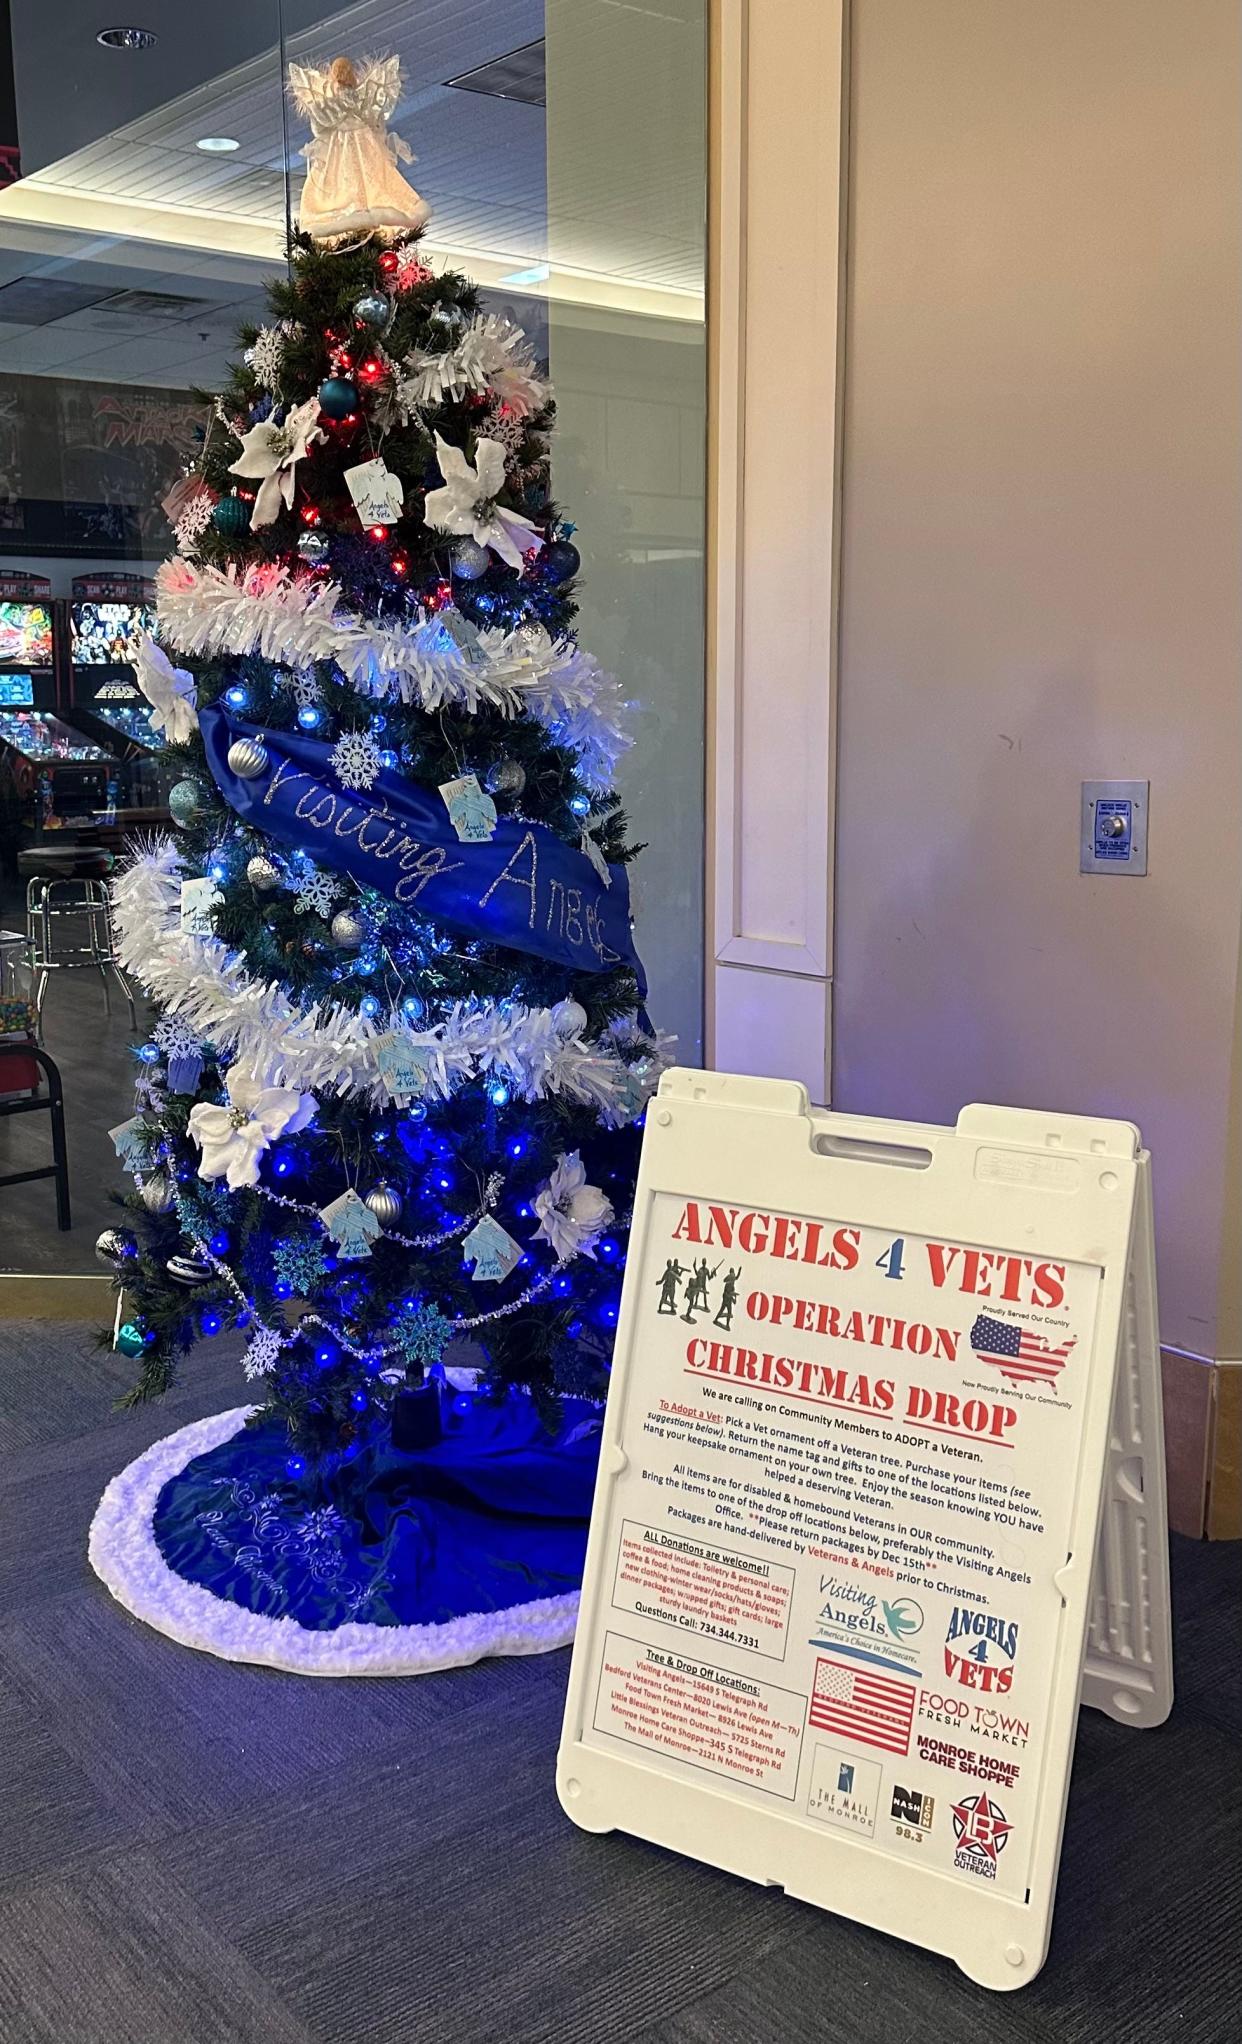 Participants are needed for Operation Christmas Drop, an Angels 4 Vets project designed to deliver food and gifts to local disabled and homebound veterans.